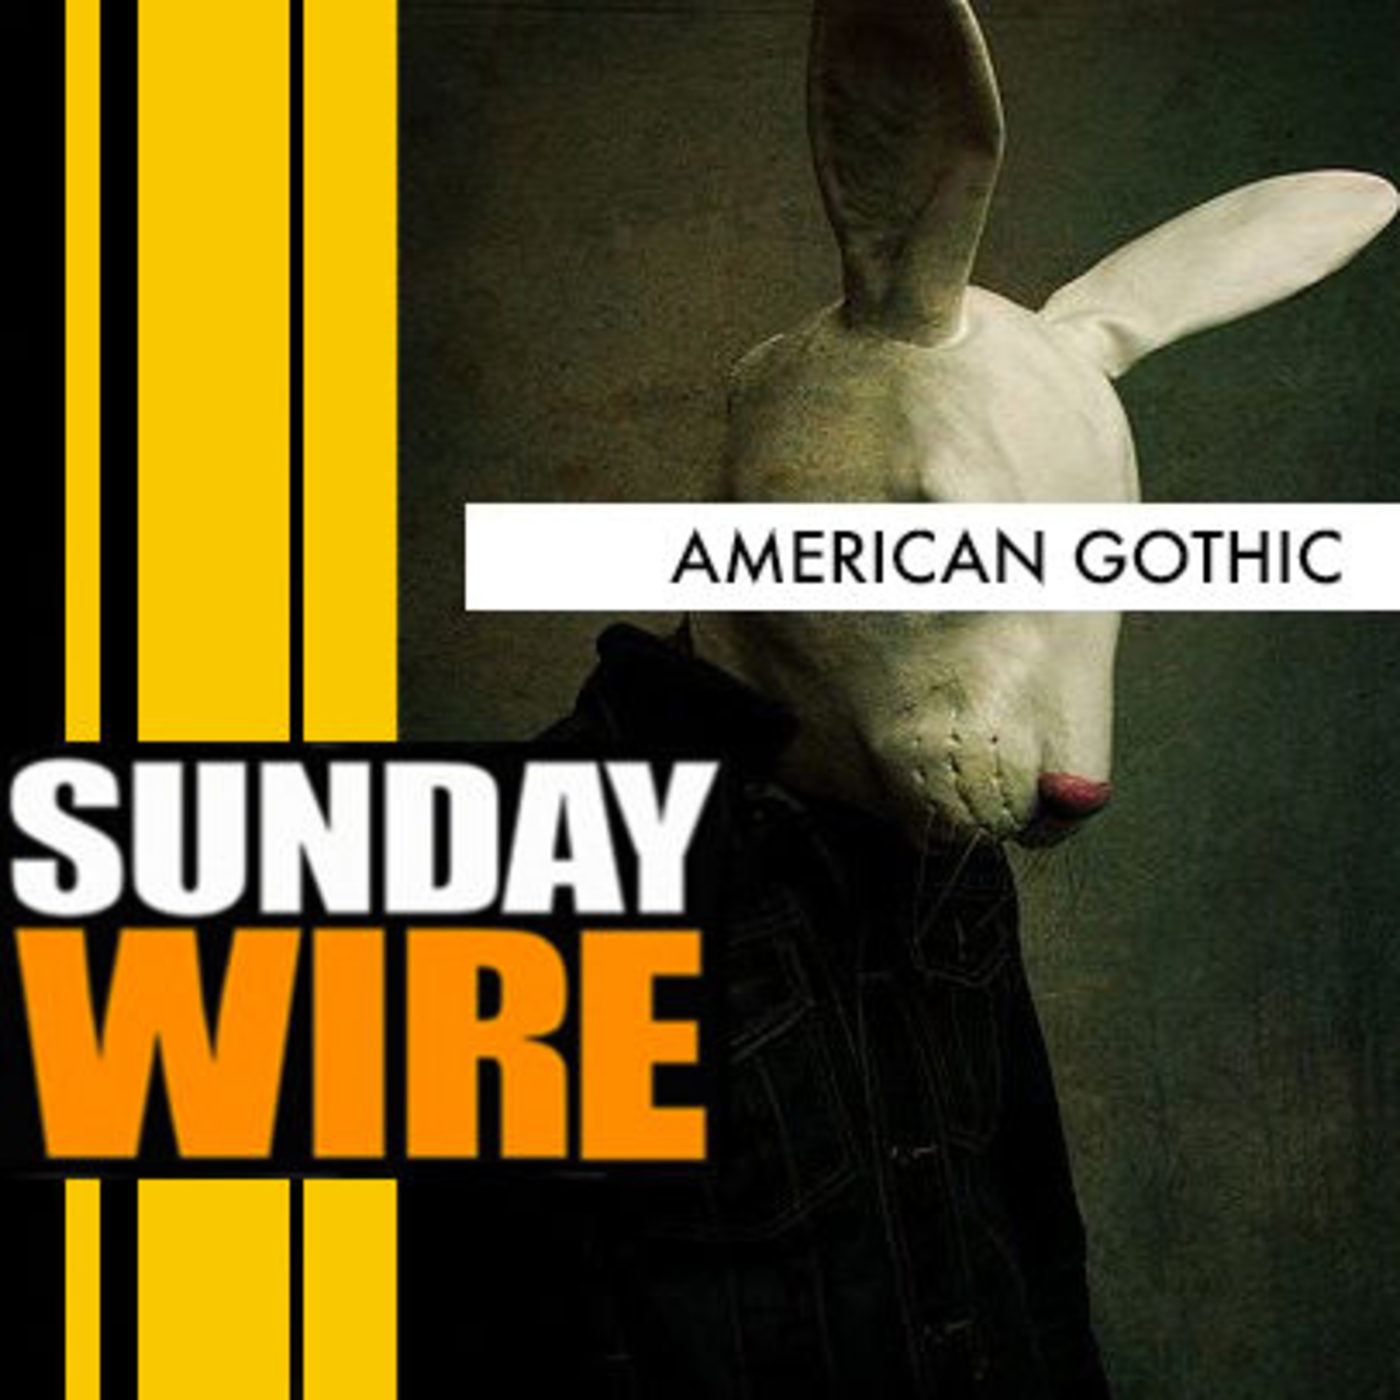 Episode #254 – ‘American Gothic’ with guests Gilad Atzmon and more